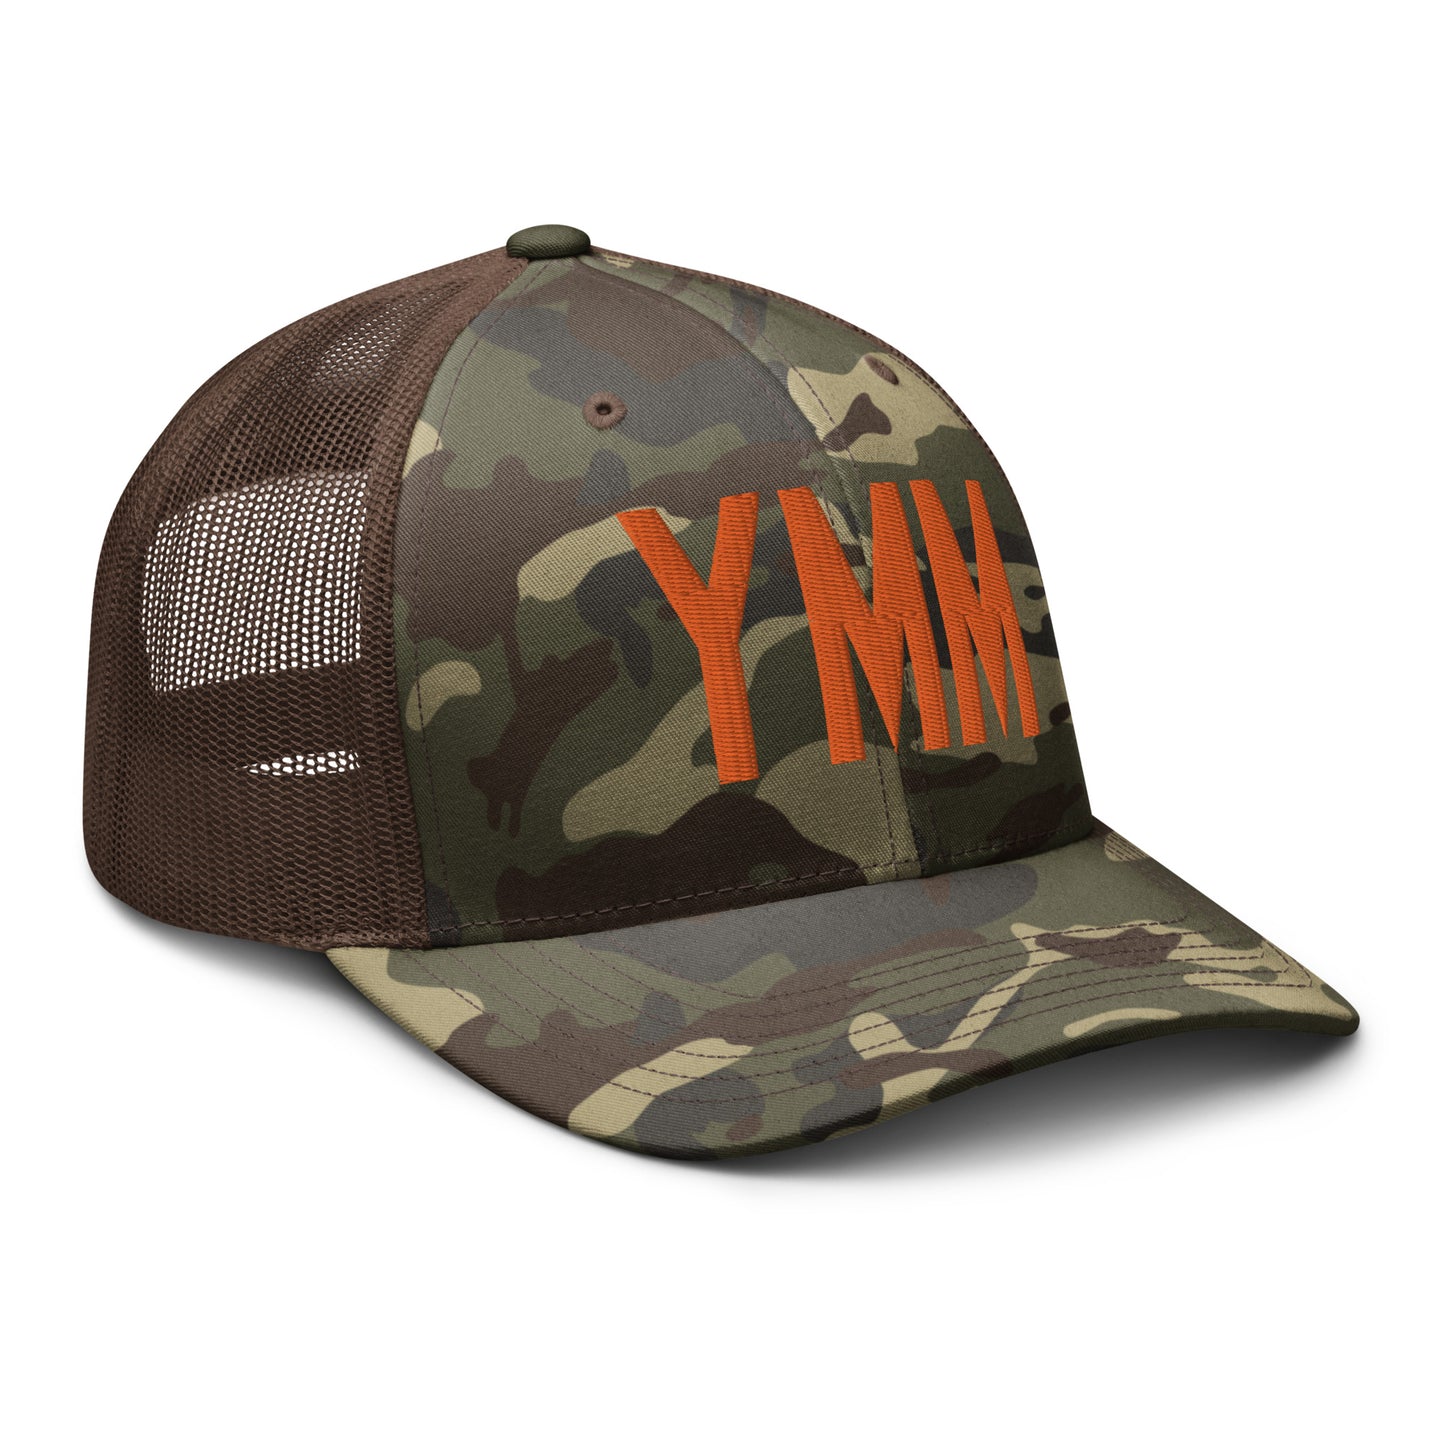 Airport Code Camouflage Trucker Hat - Orange • YMM Fort McMurray • YHM Designs - Image 16